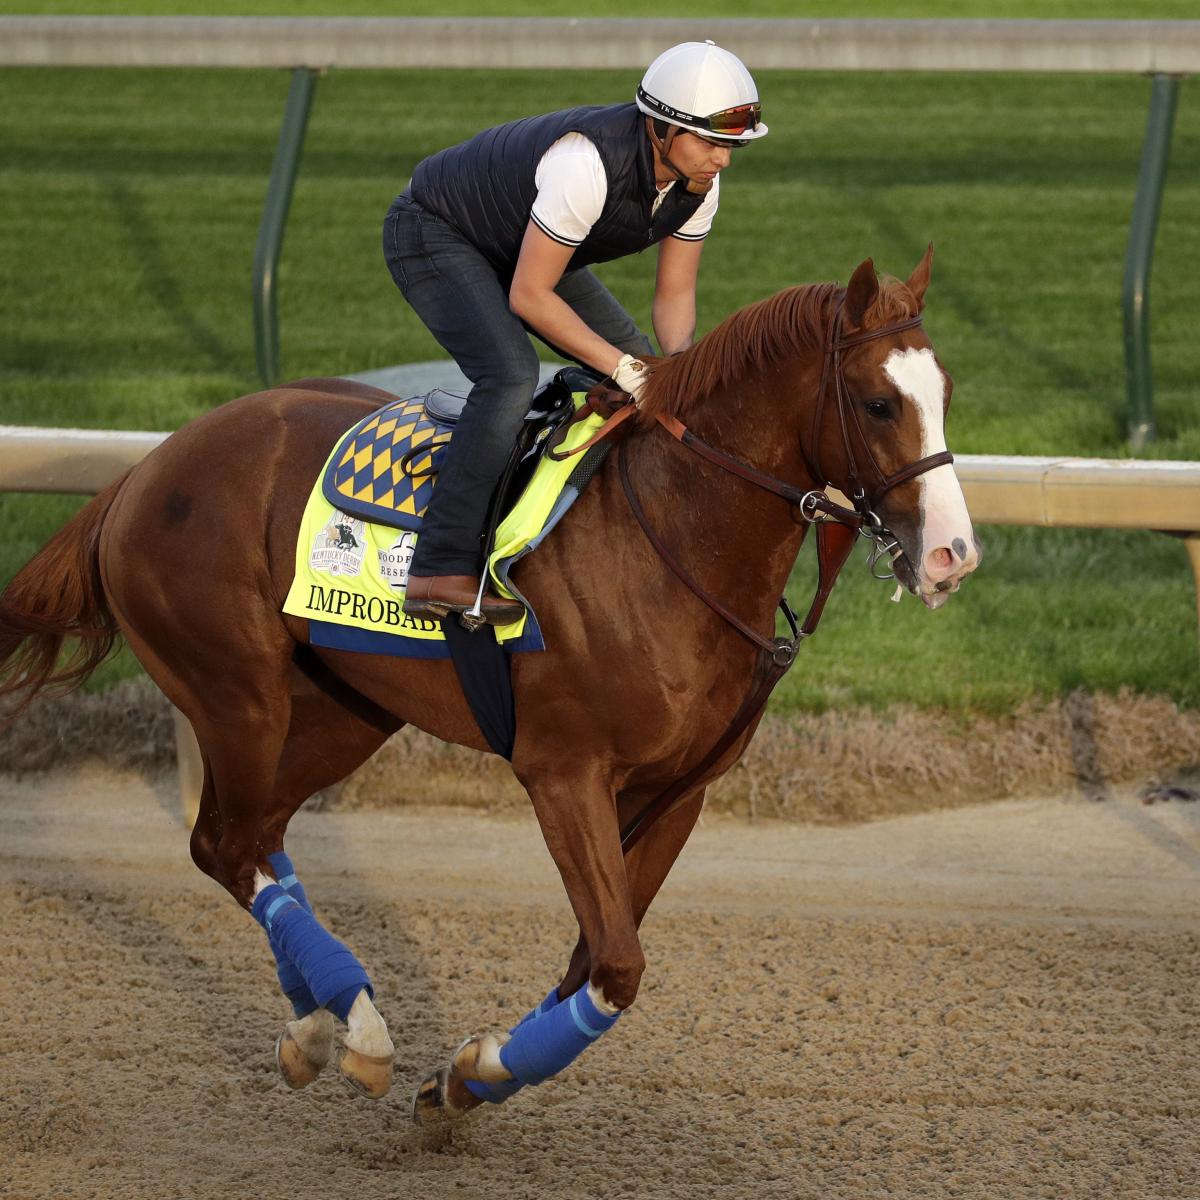 Preakness 2019 Post Time Race Schedule, Post Positions Info and